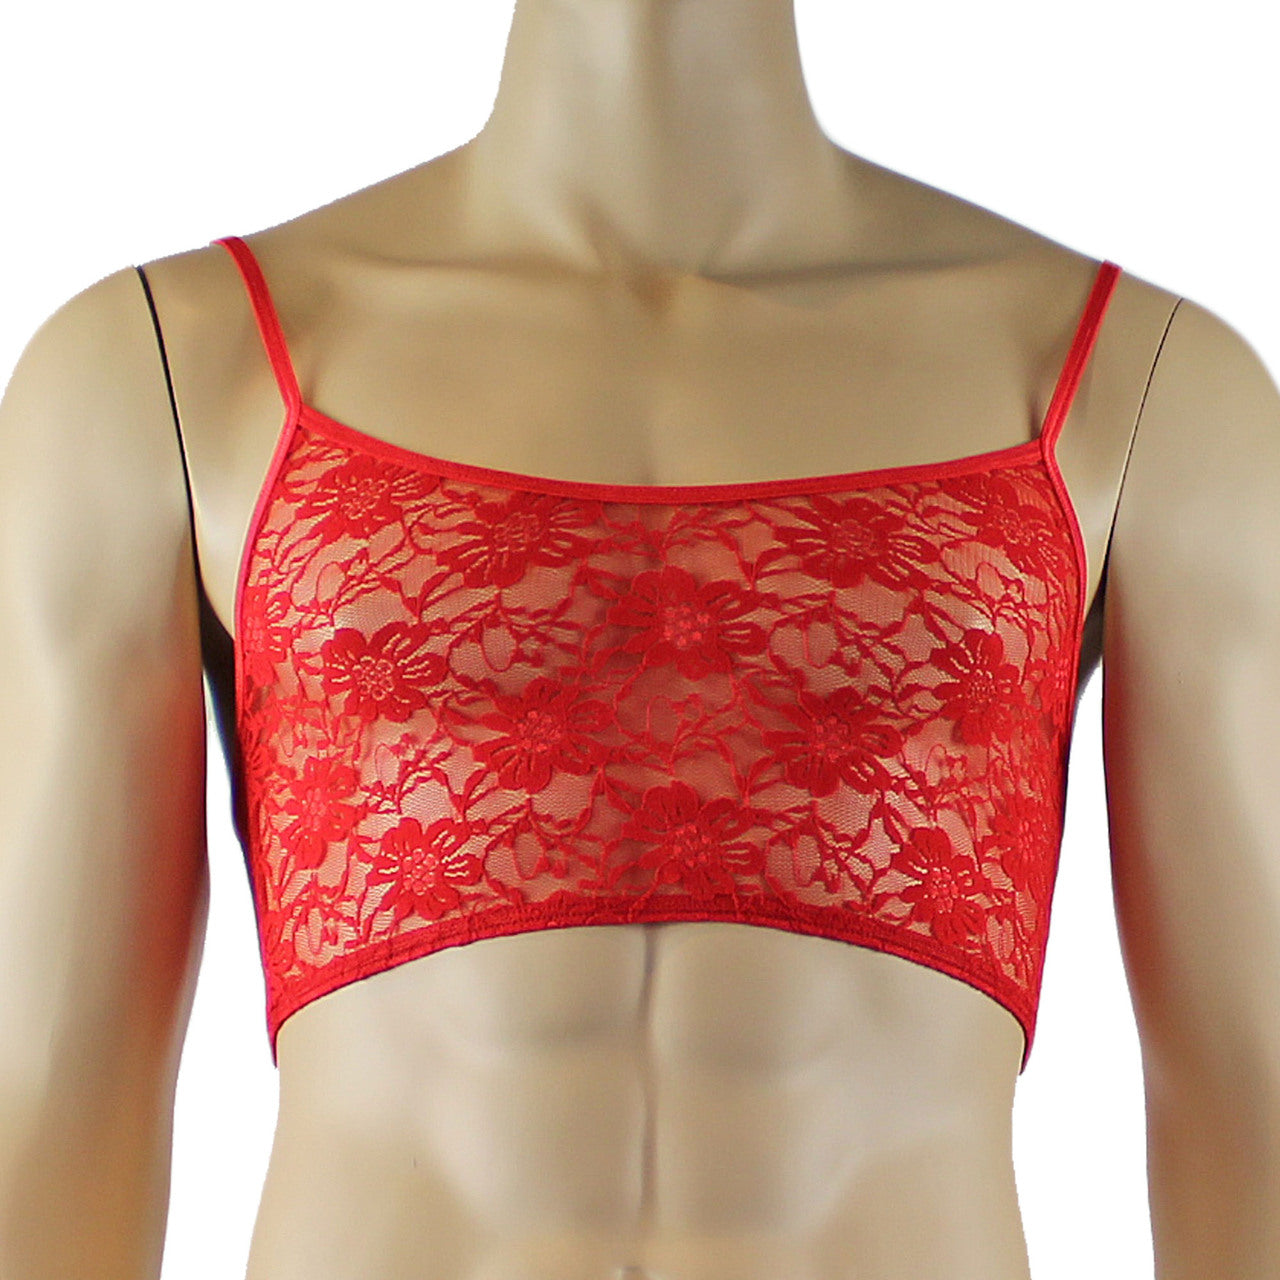 Mens Lace Crop Bra Top Camisole and Male Lingerie Panty Briefs (red plus other colours)